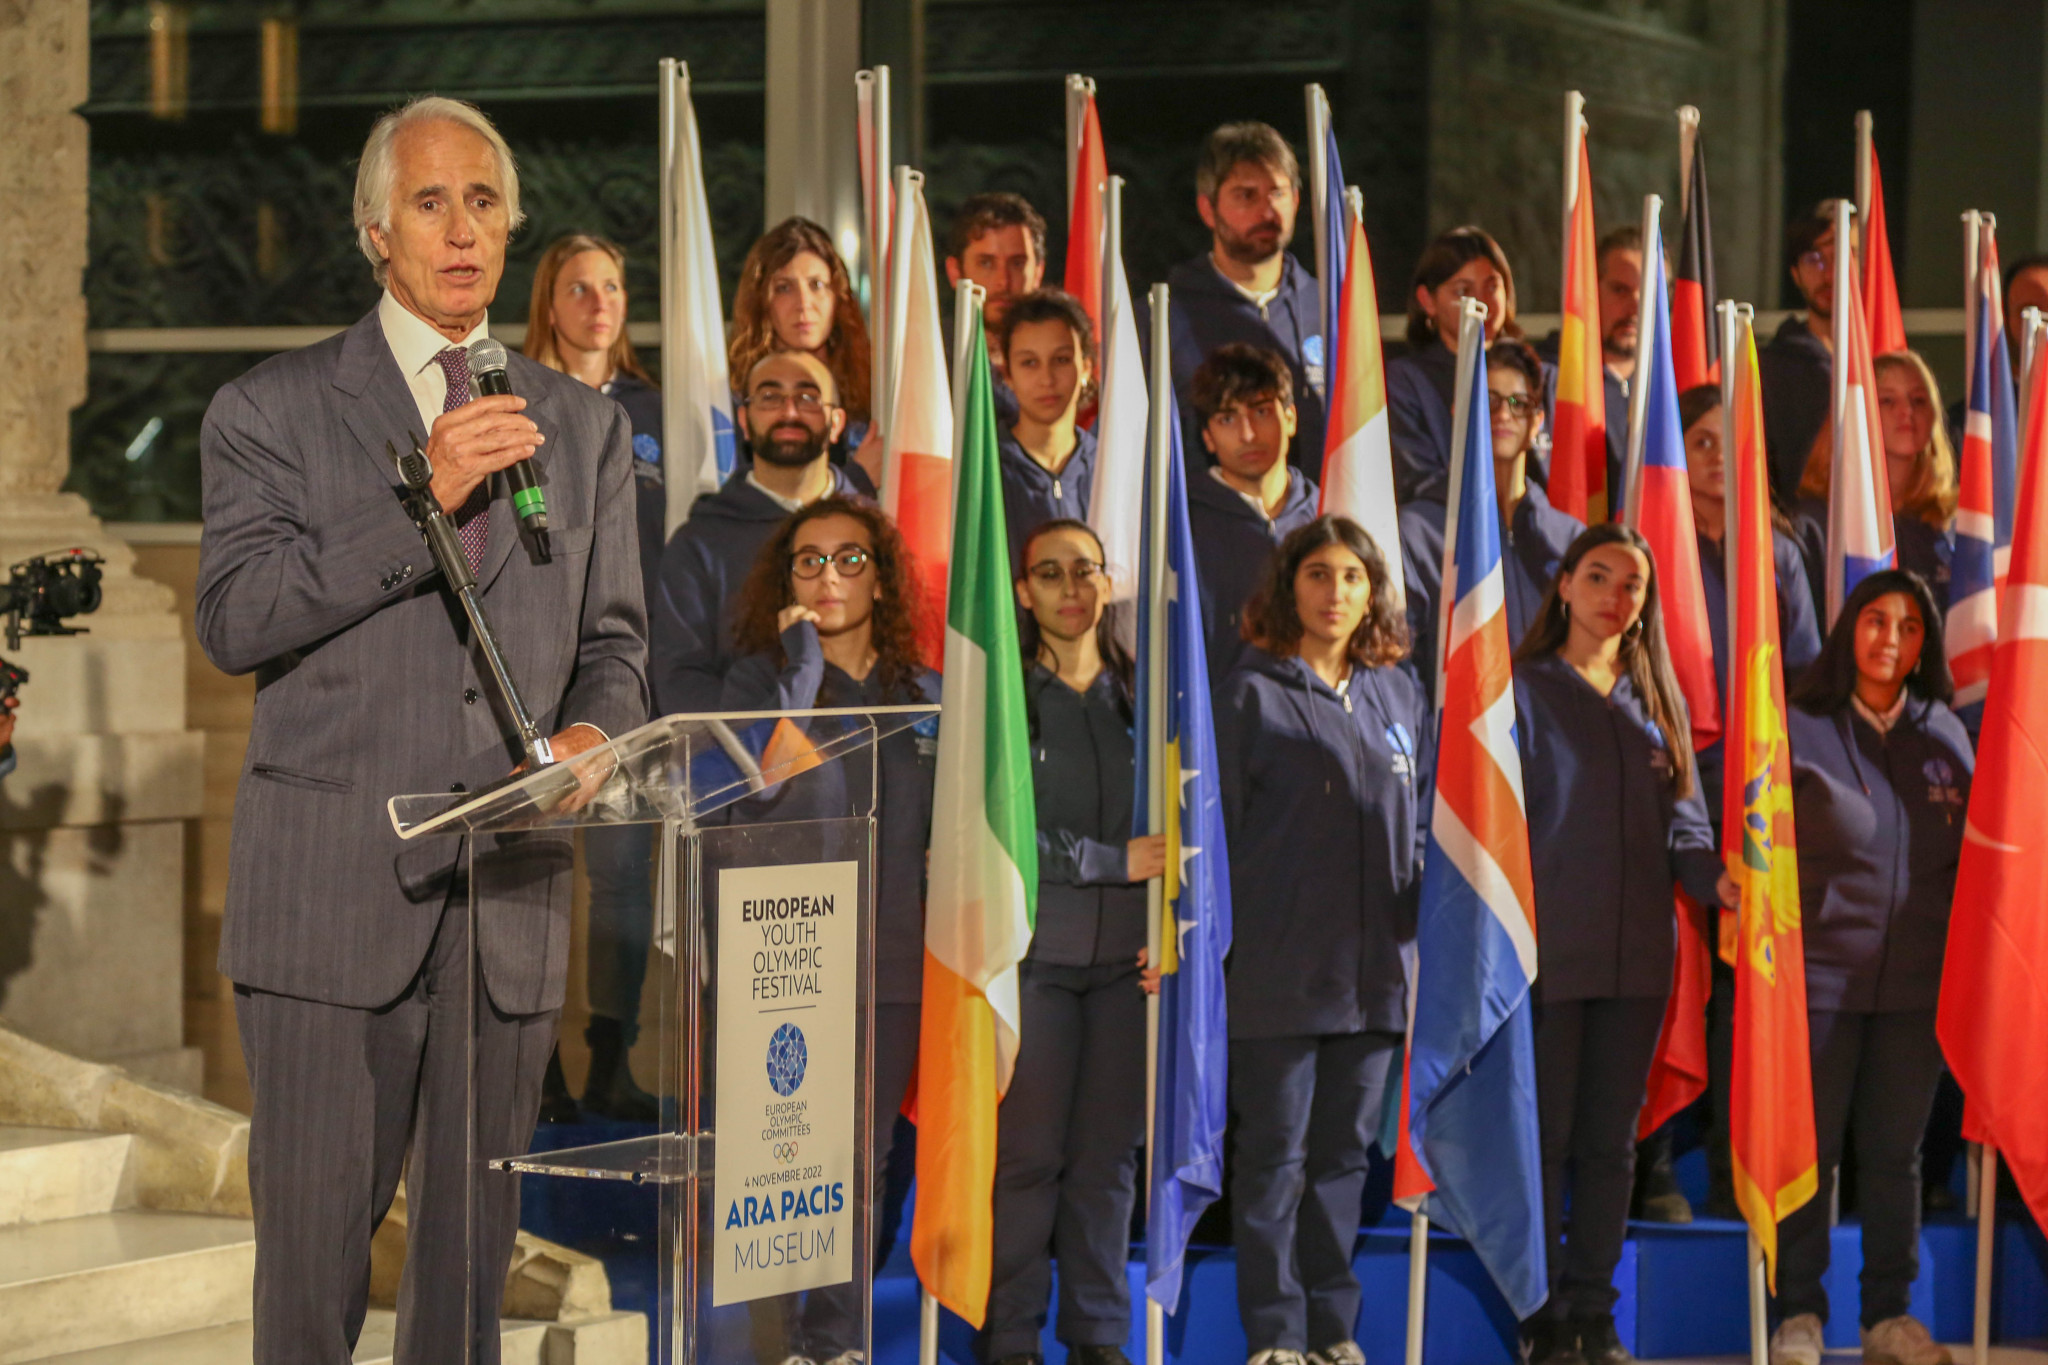 It is hoped that stars from the Winter EYOF, scheduled from January 21 to 28 next year, can use it as a springboard to compete at Milan Cortina 2026 ©EOC